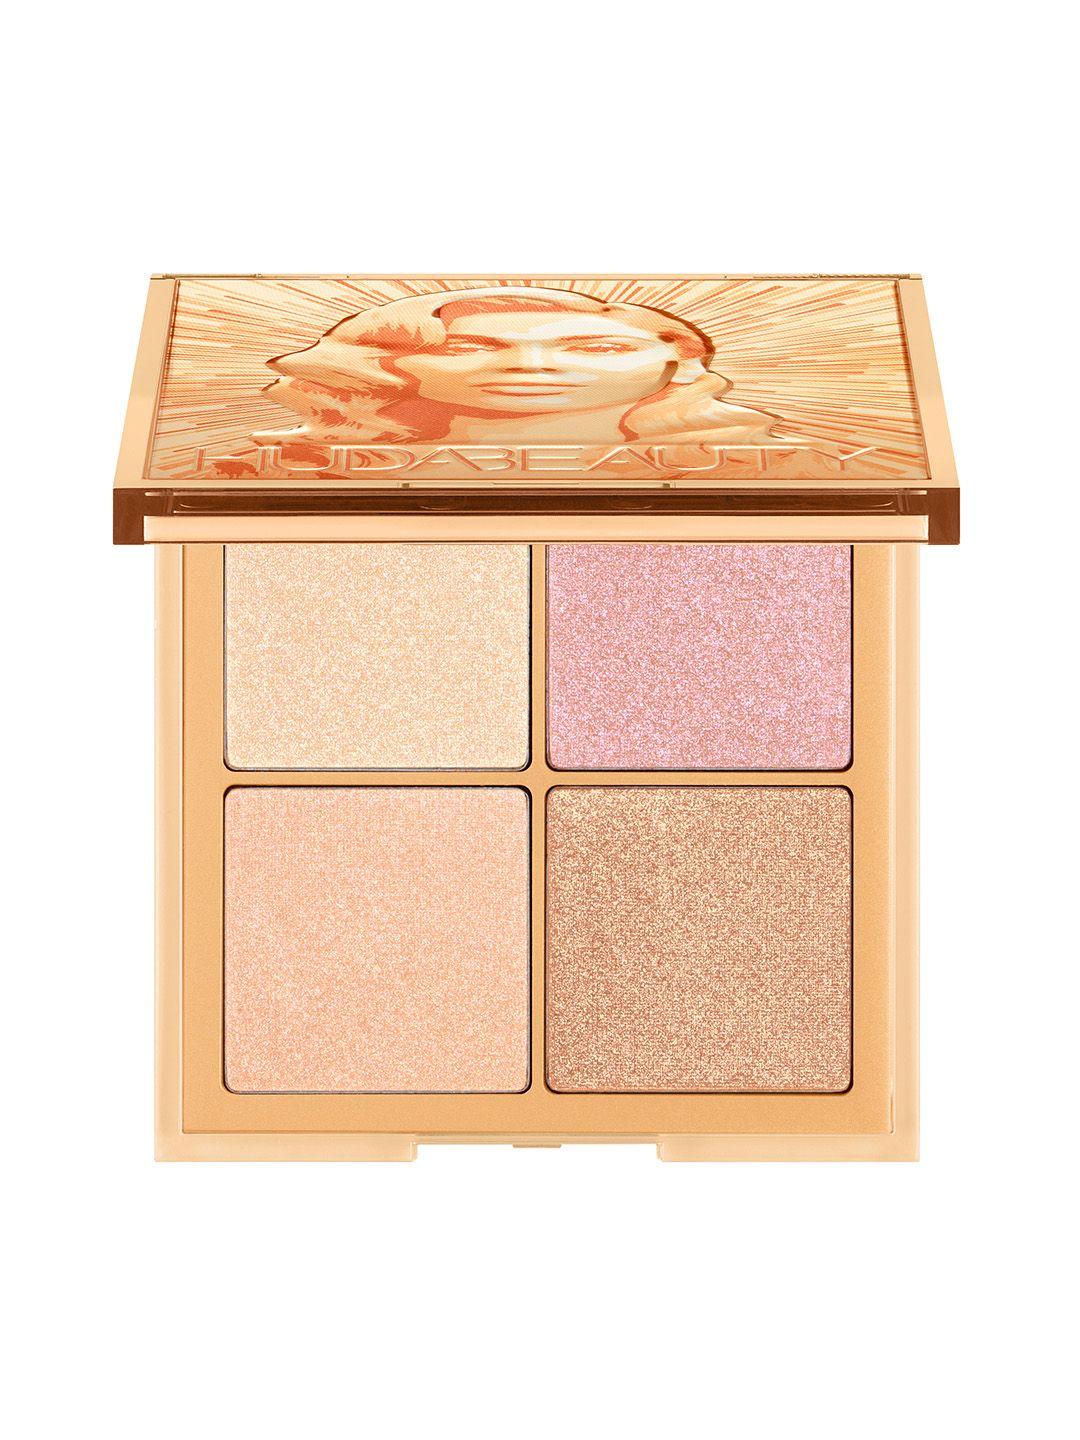 huda-beauty-glow-obsessions-highlighter-face-palette-6.4g---light